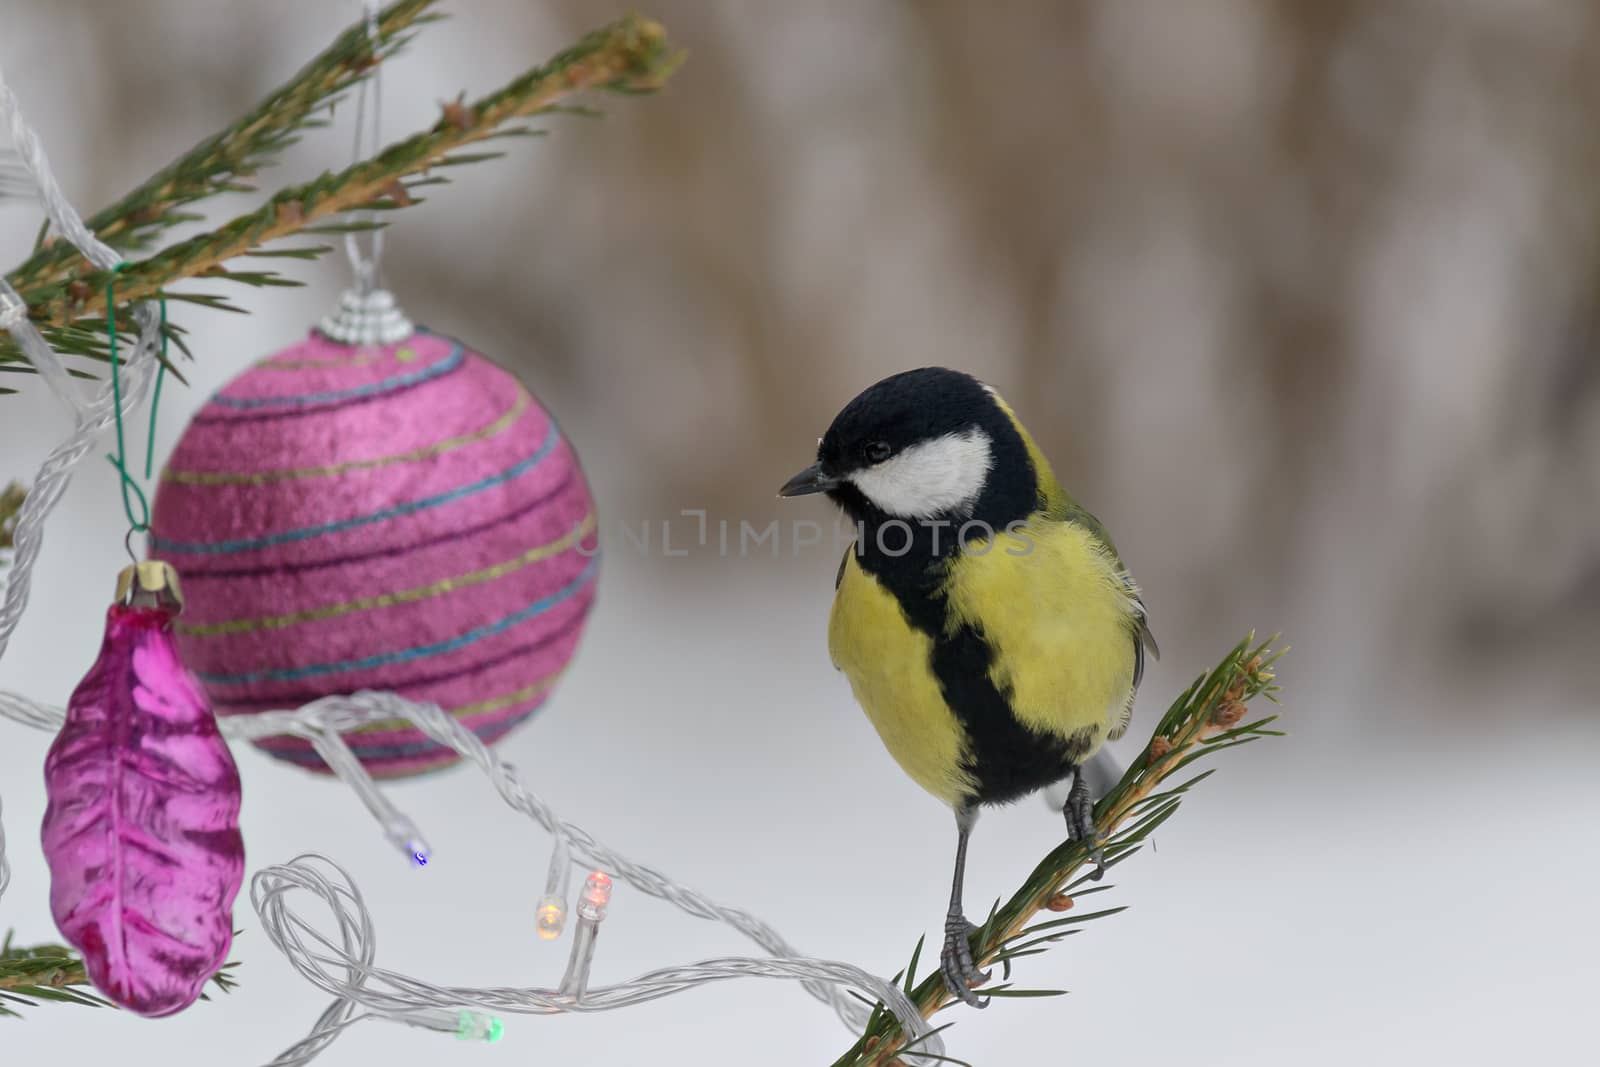 Titmouse sitting on a branch of spruce, decorated for Christmas. Selective focus